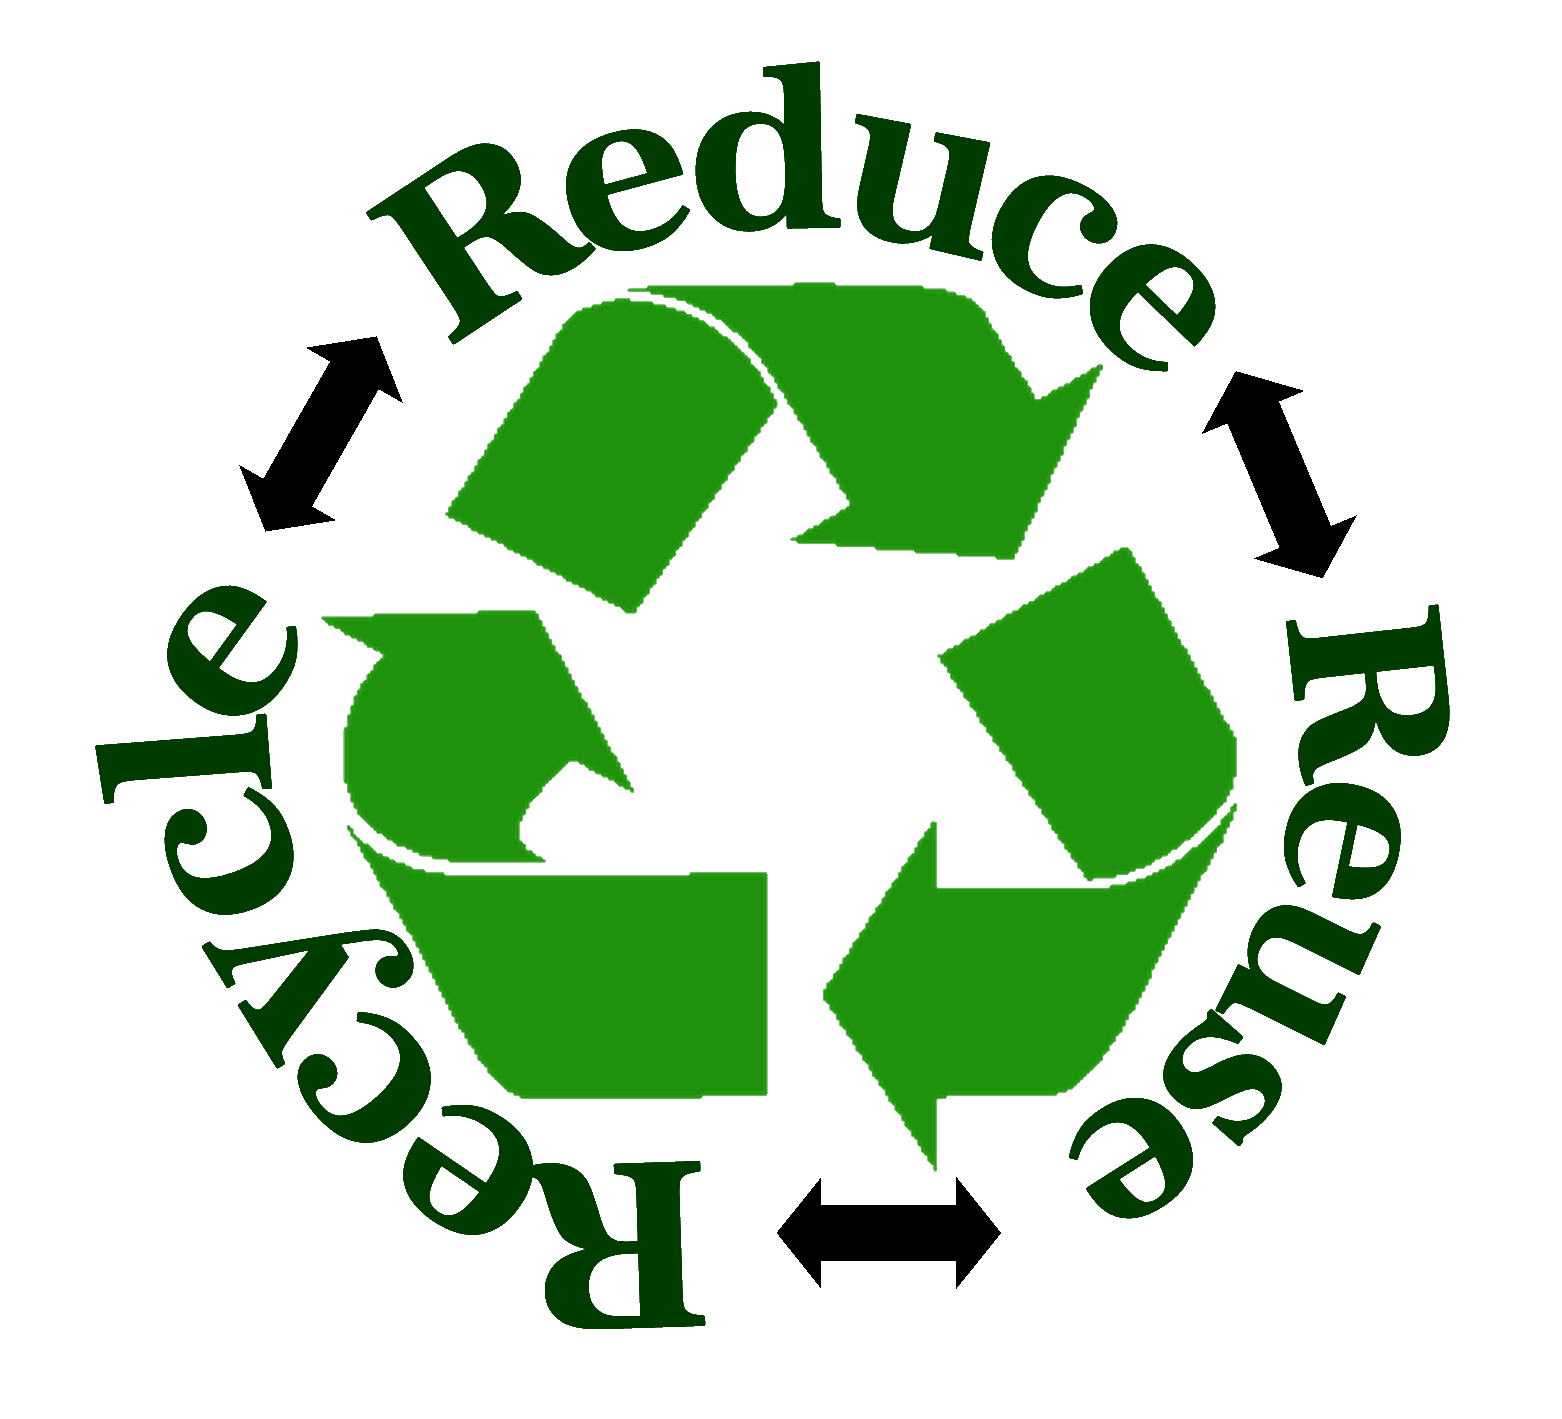 The Recycle Symbol Print Color And Cut Out Therecycle